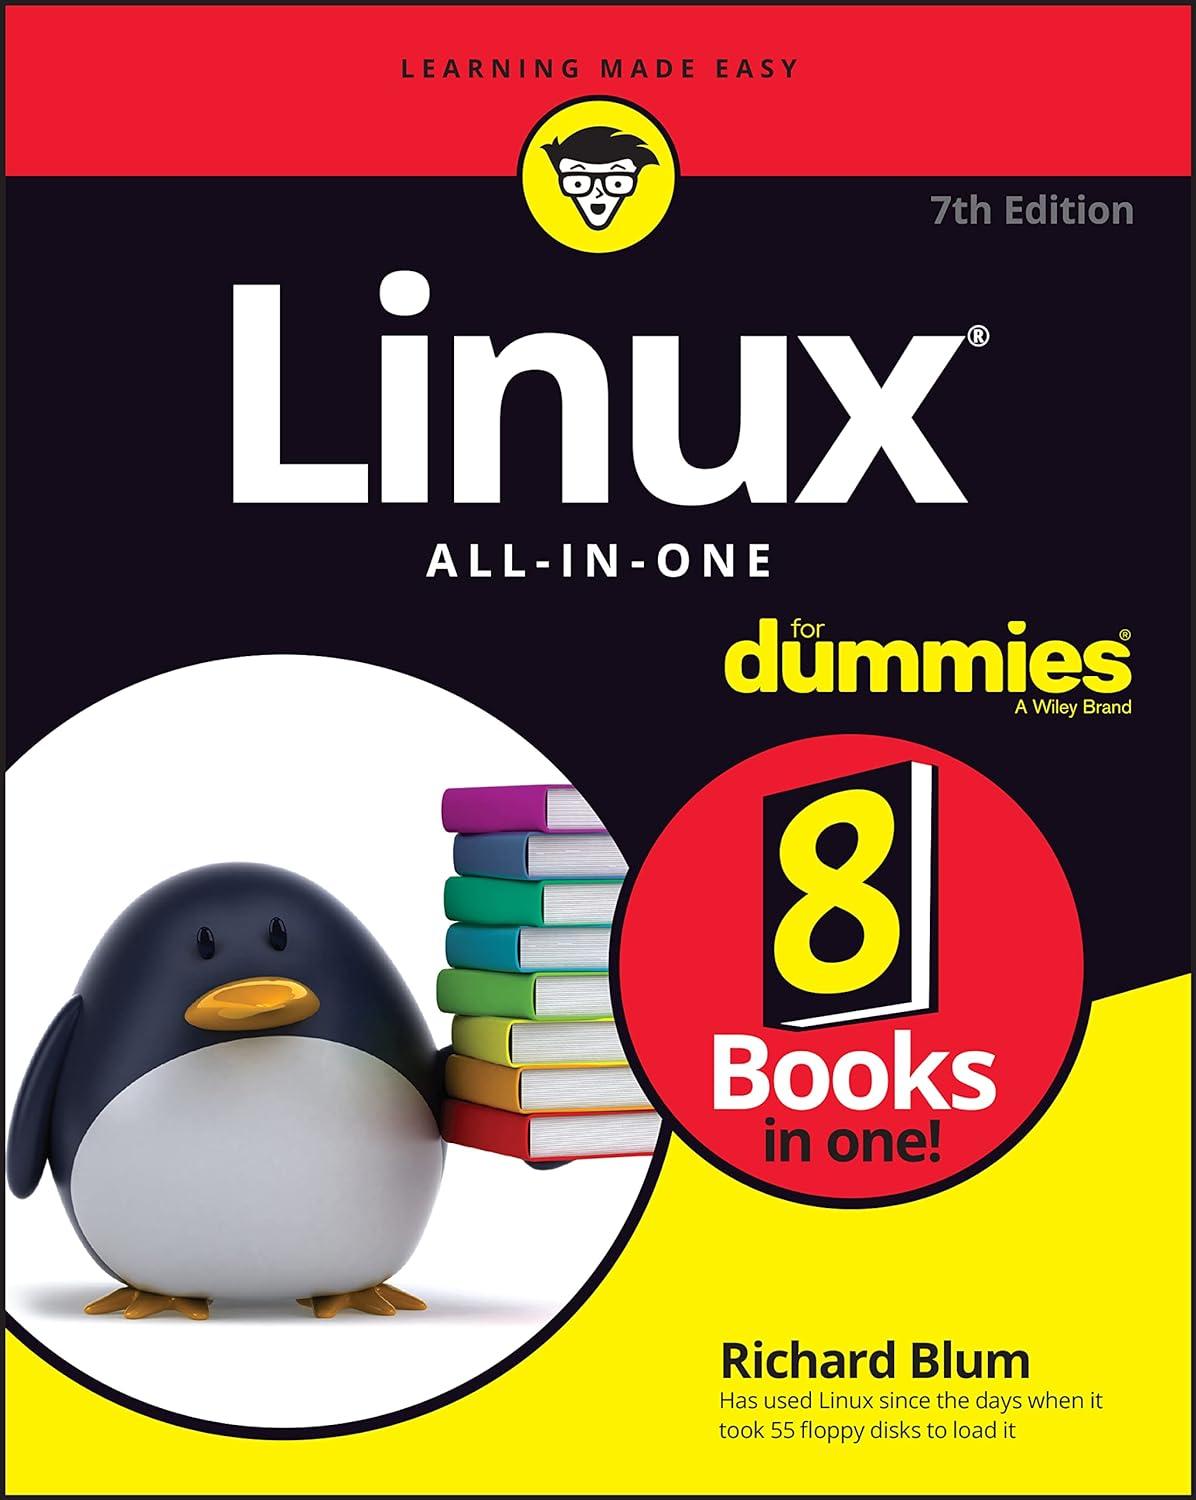 linux all in one for dummies for dummies 7th edition richard blum 1119901928, 978-1119901921